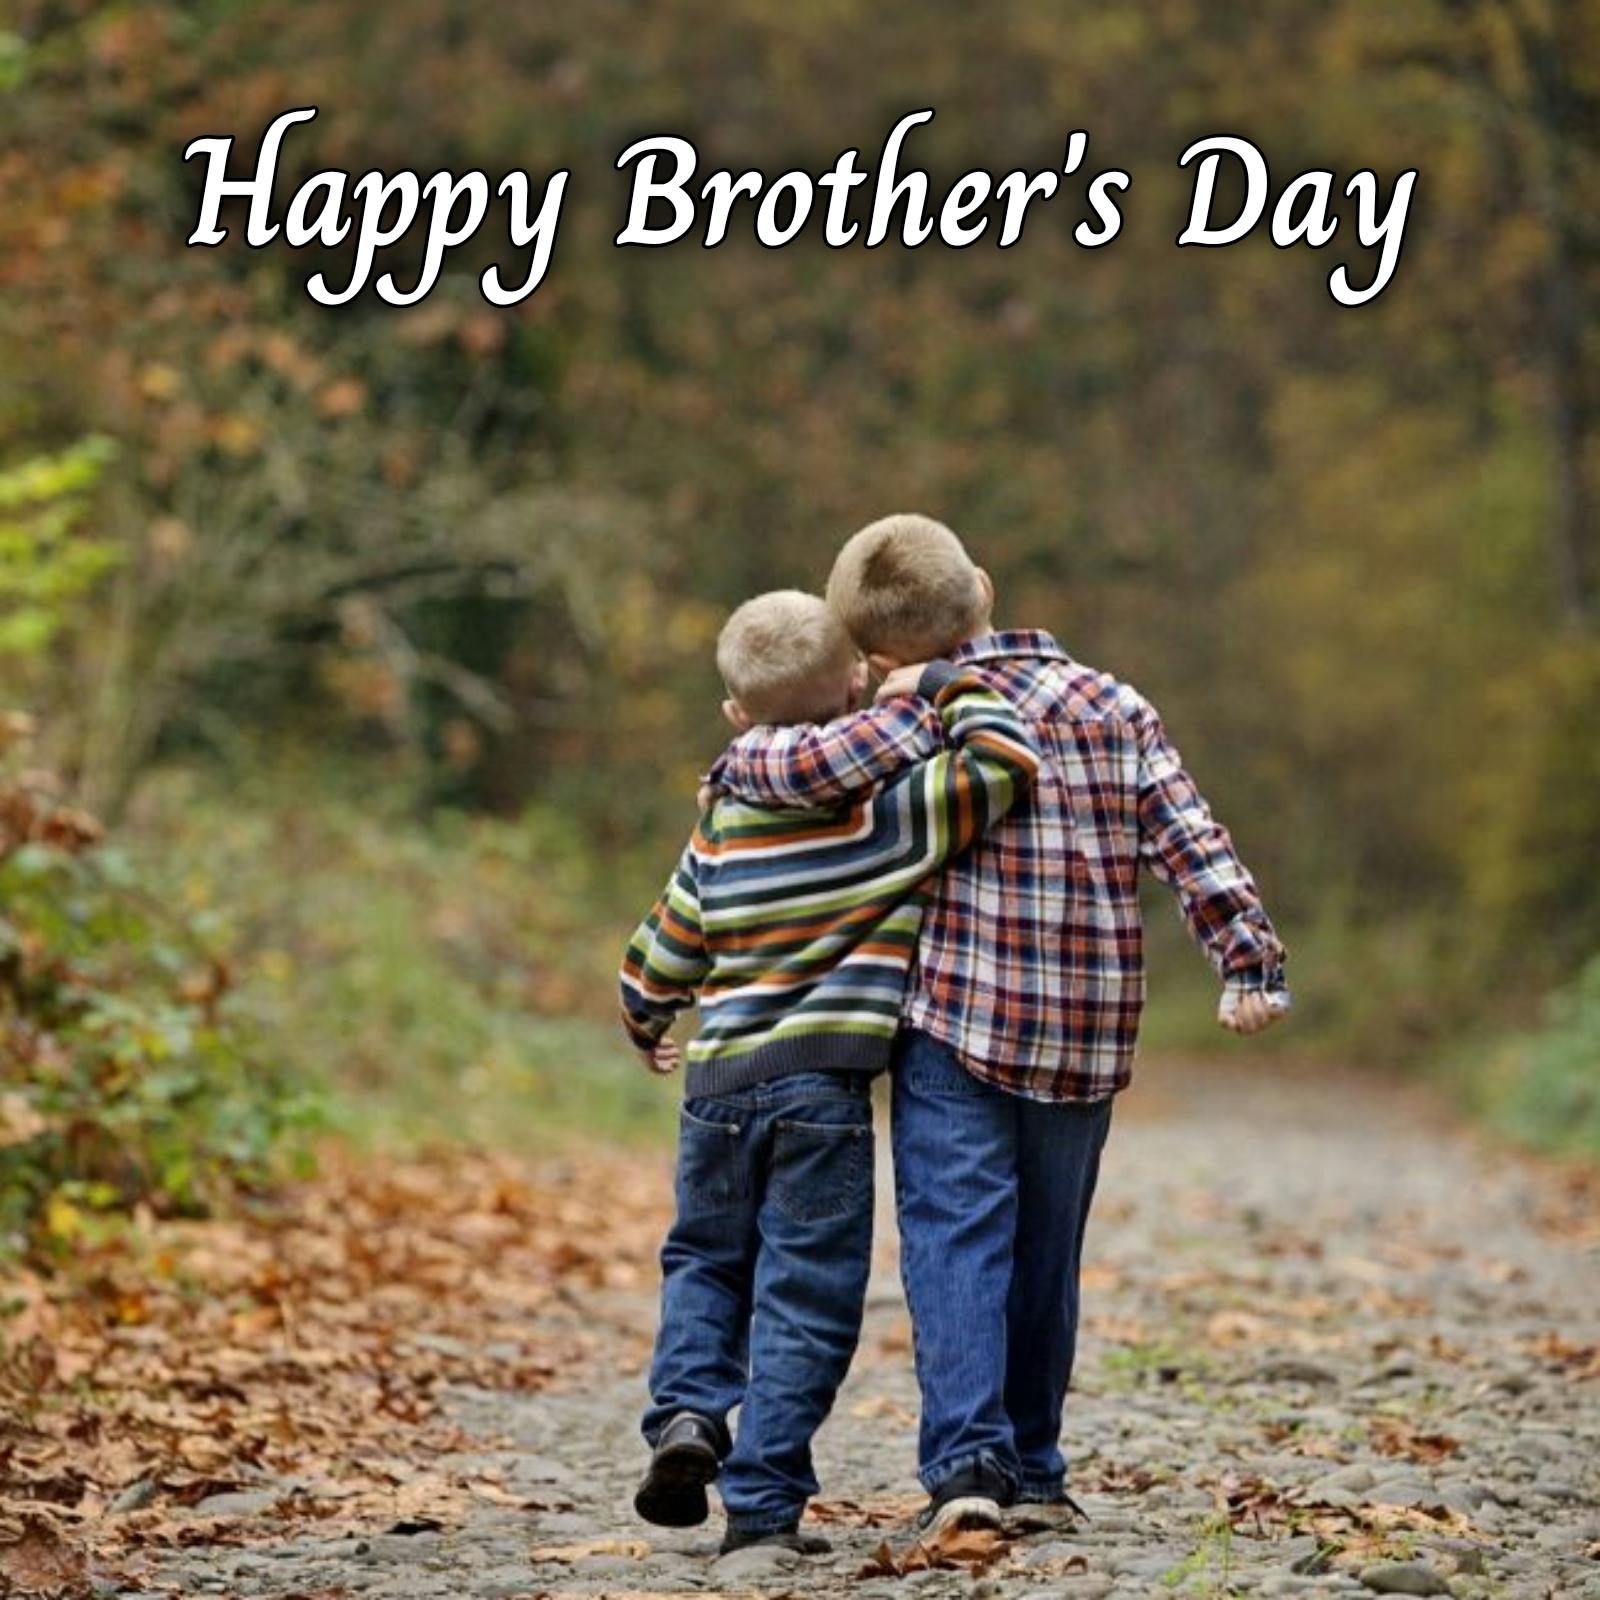 Bhai Diwas Photo 2023 Happy Brothers Day Wallpaper HD images